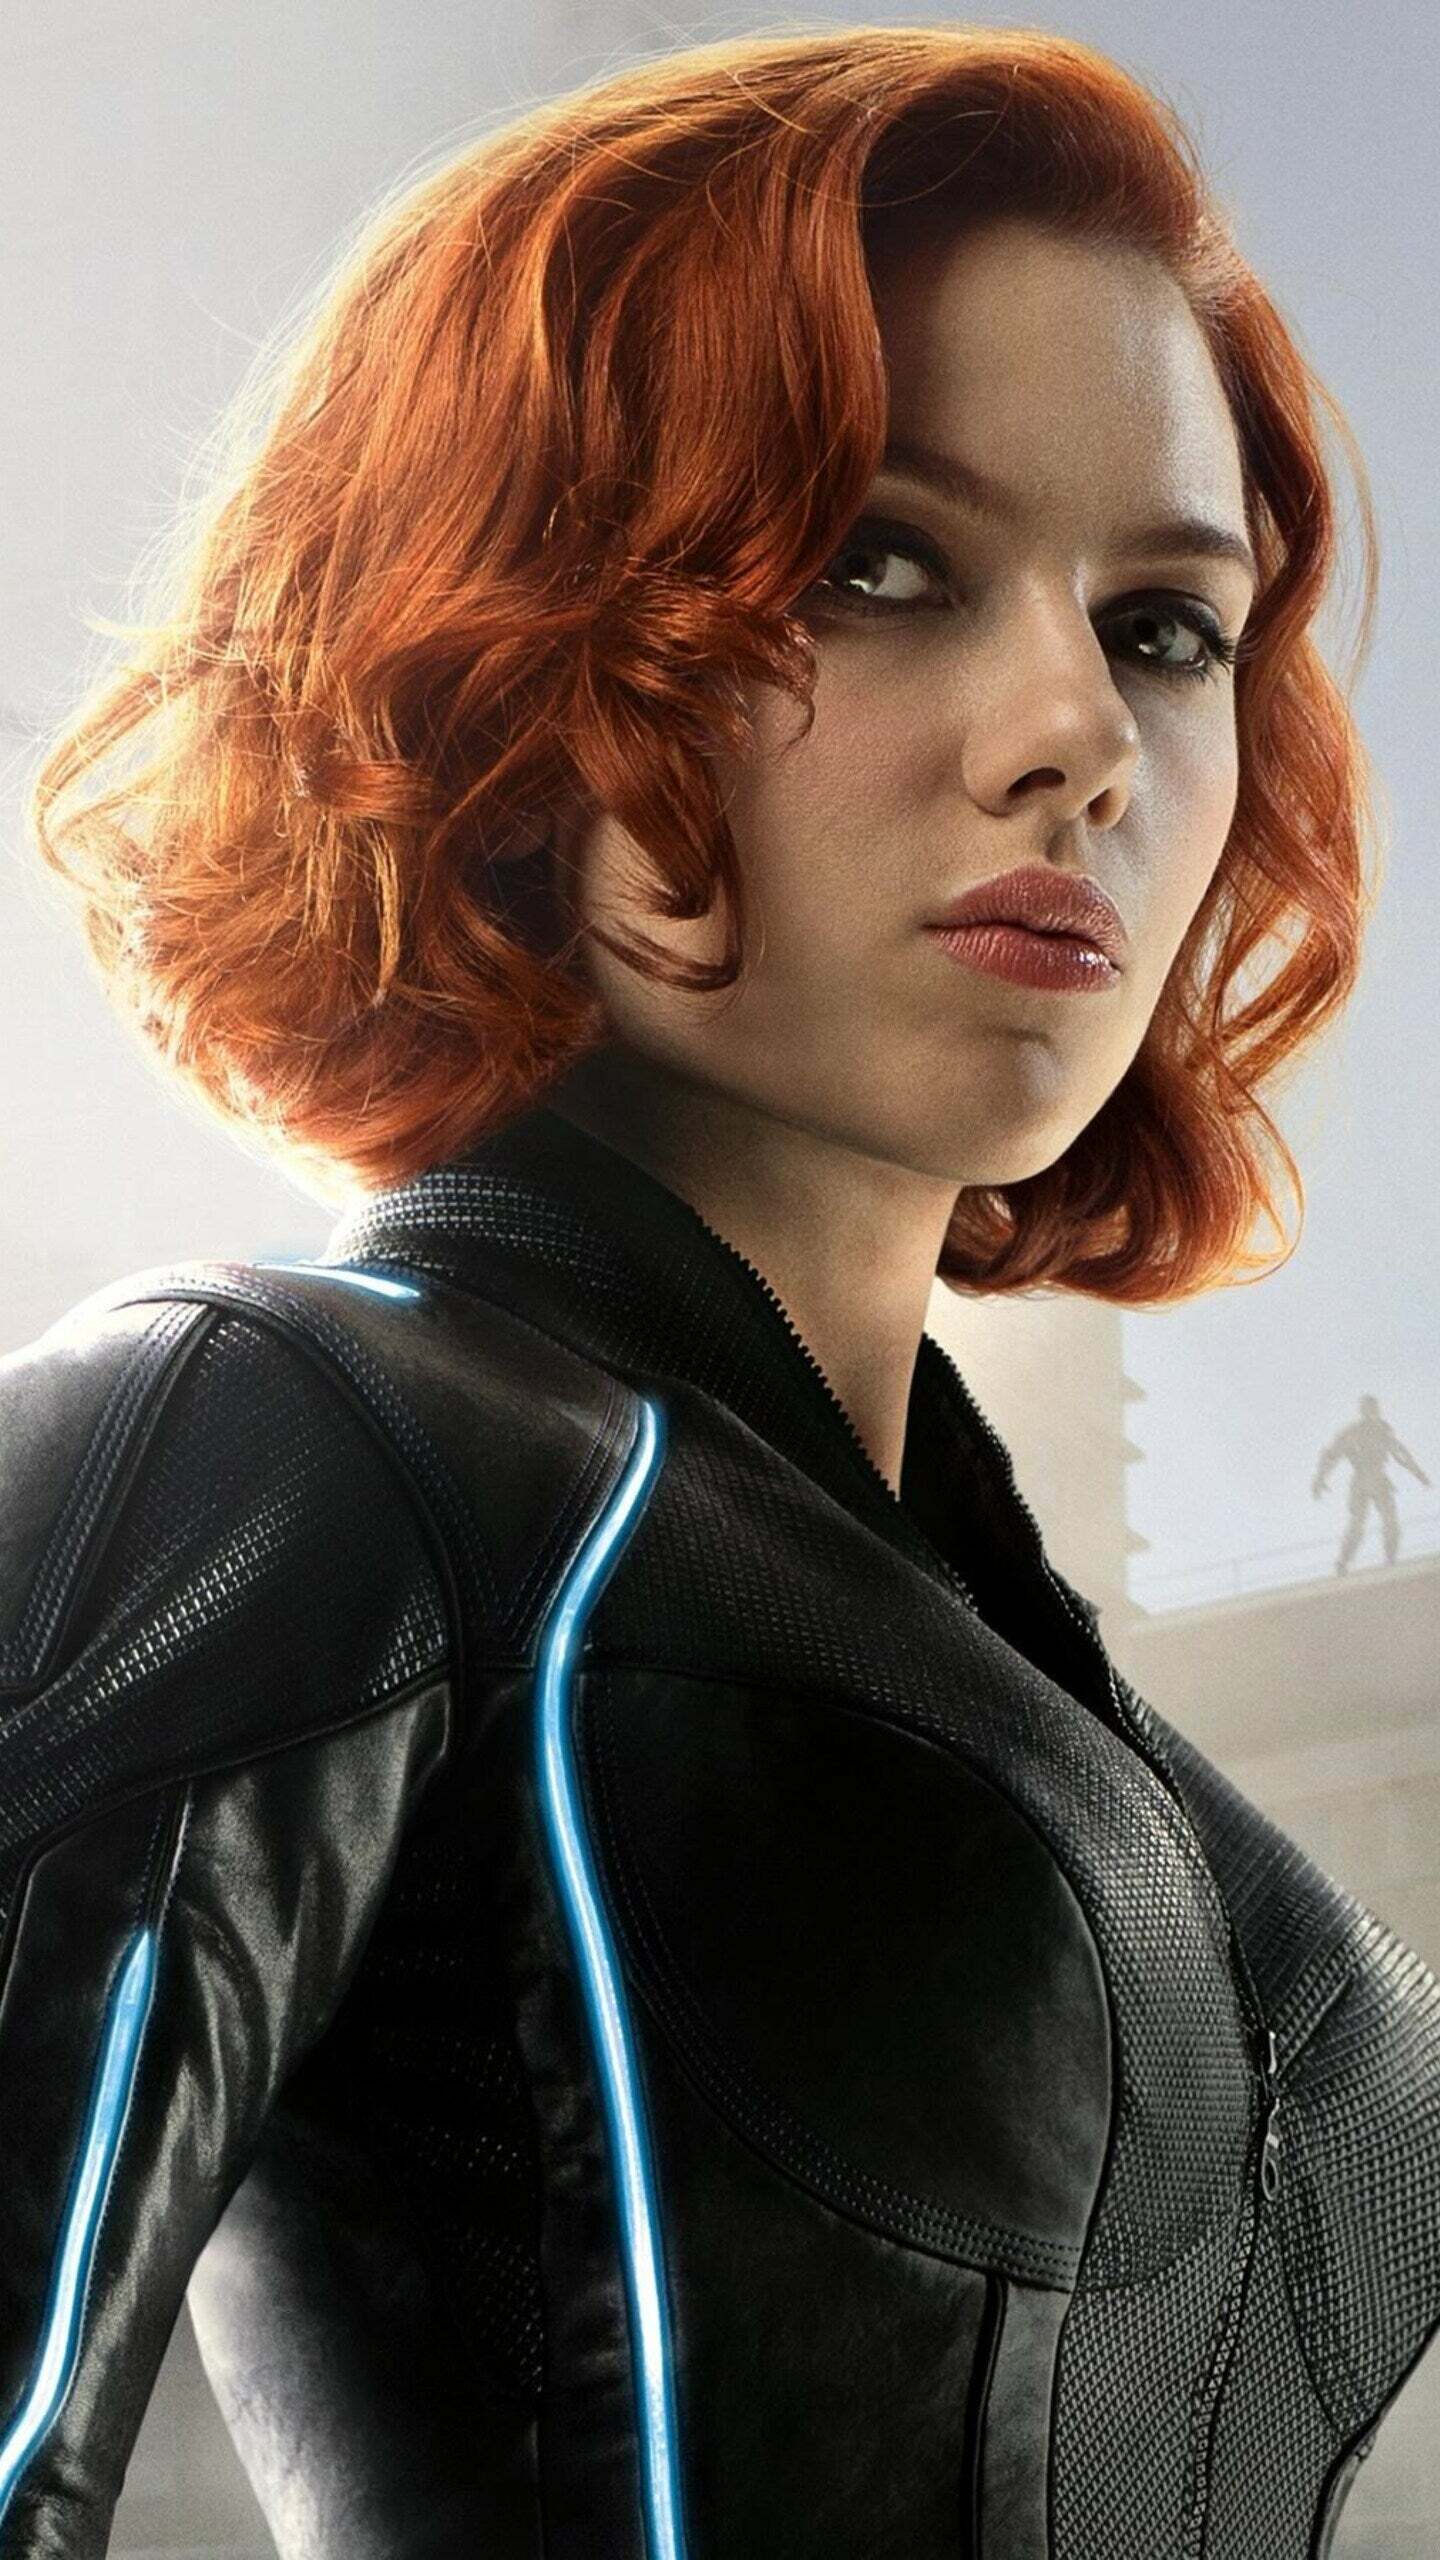 Love to fuck Scarlett Johansson face and pass her around